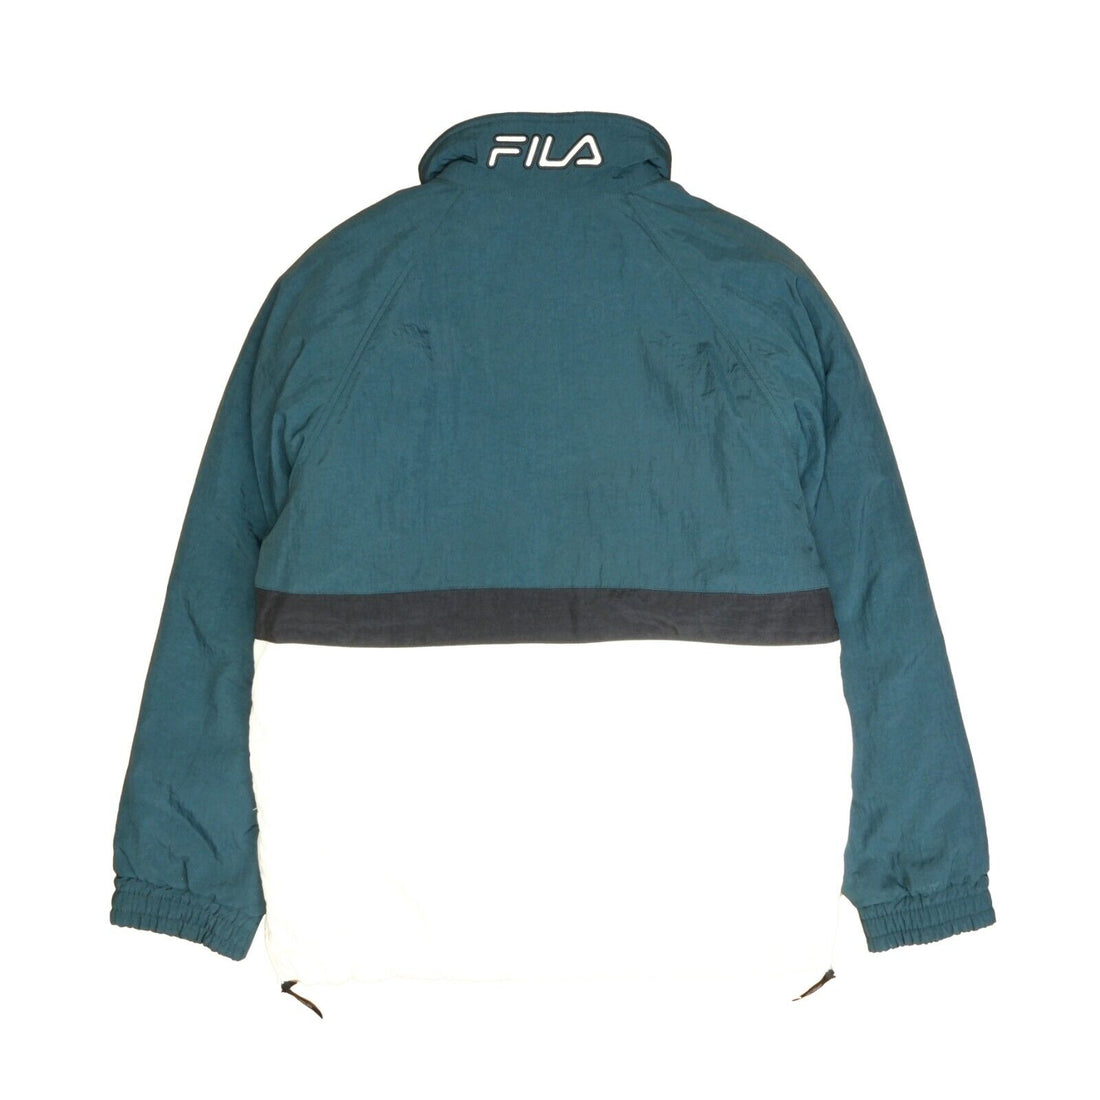 Vintage FILA Two Tone Puffer Jacket Size Large Green Insulated